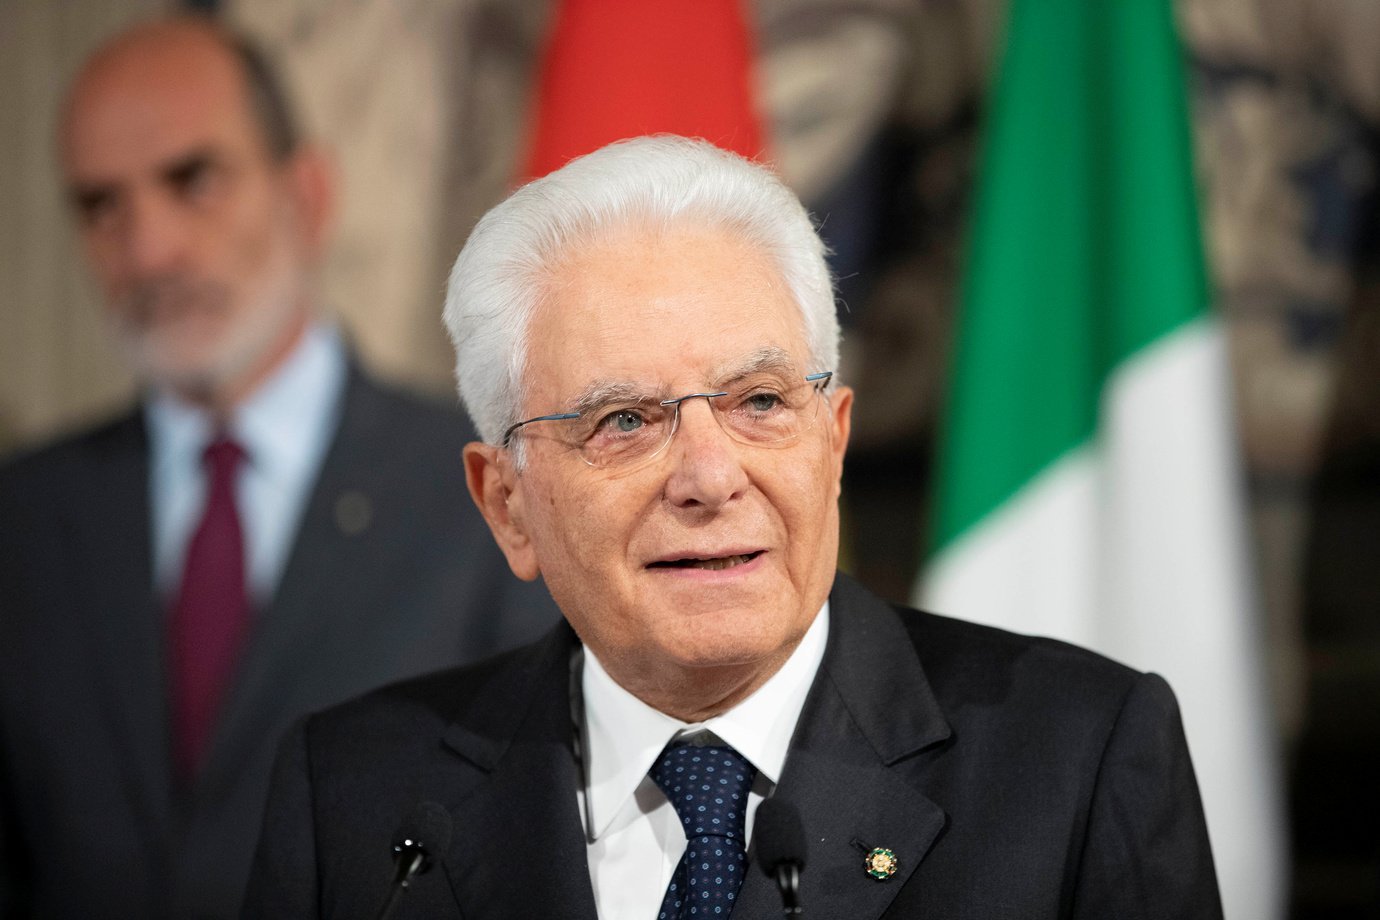 Italian President Sergio Mattarella speaks to the press after consultations with political parties’ leaders, in Rome